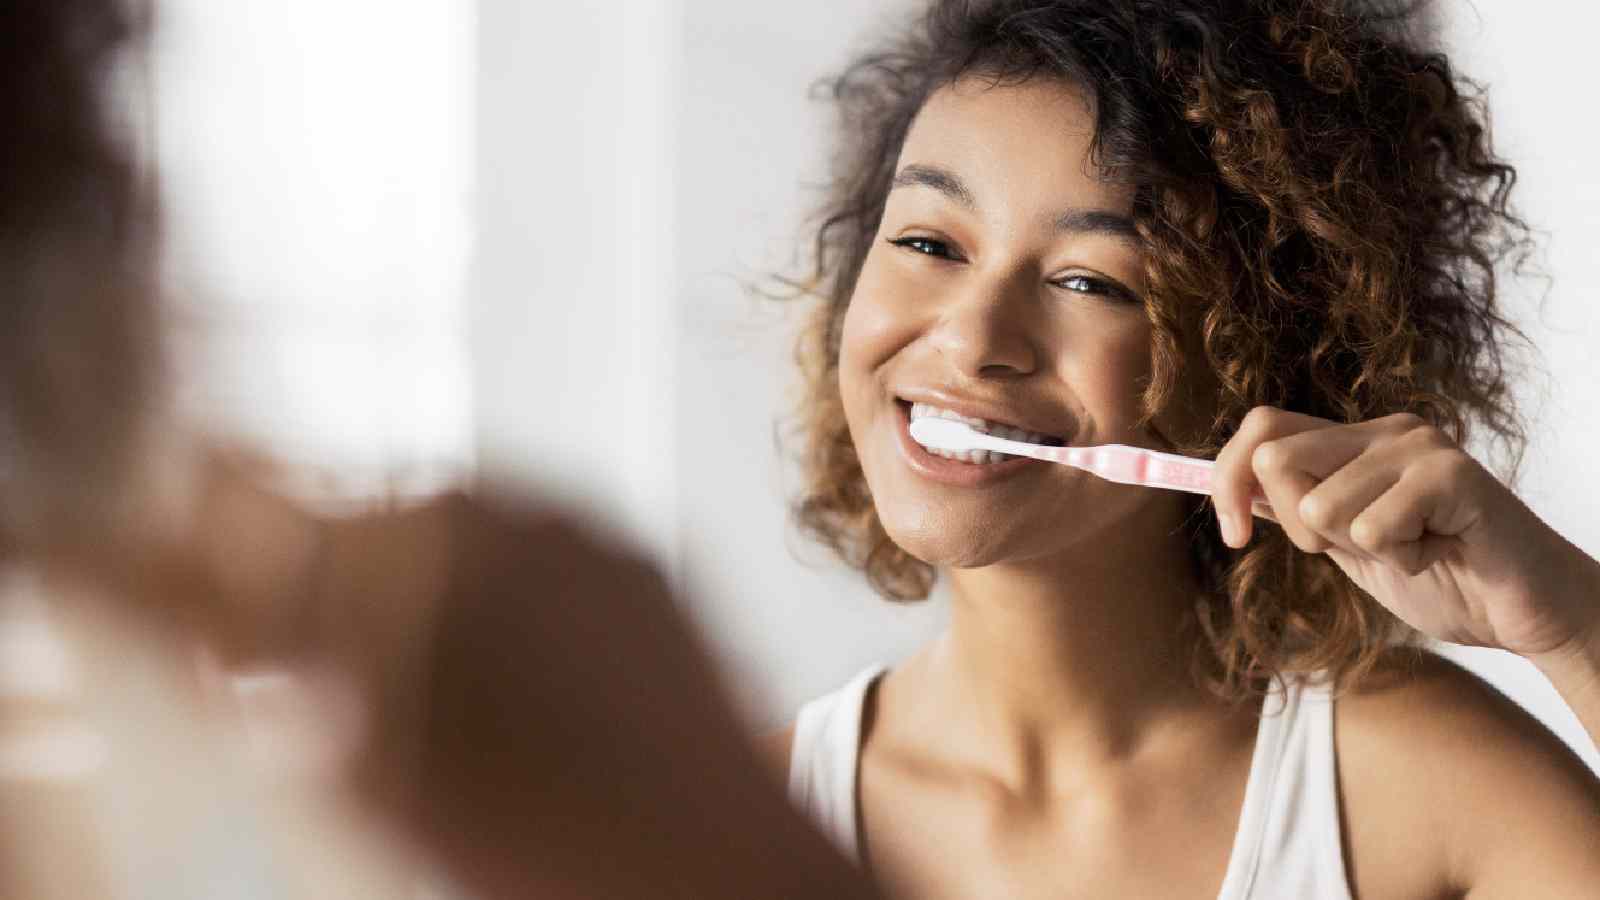 5 tips to maintain oral hygiene for sparkling teeth